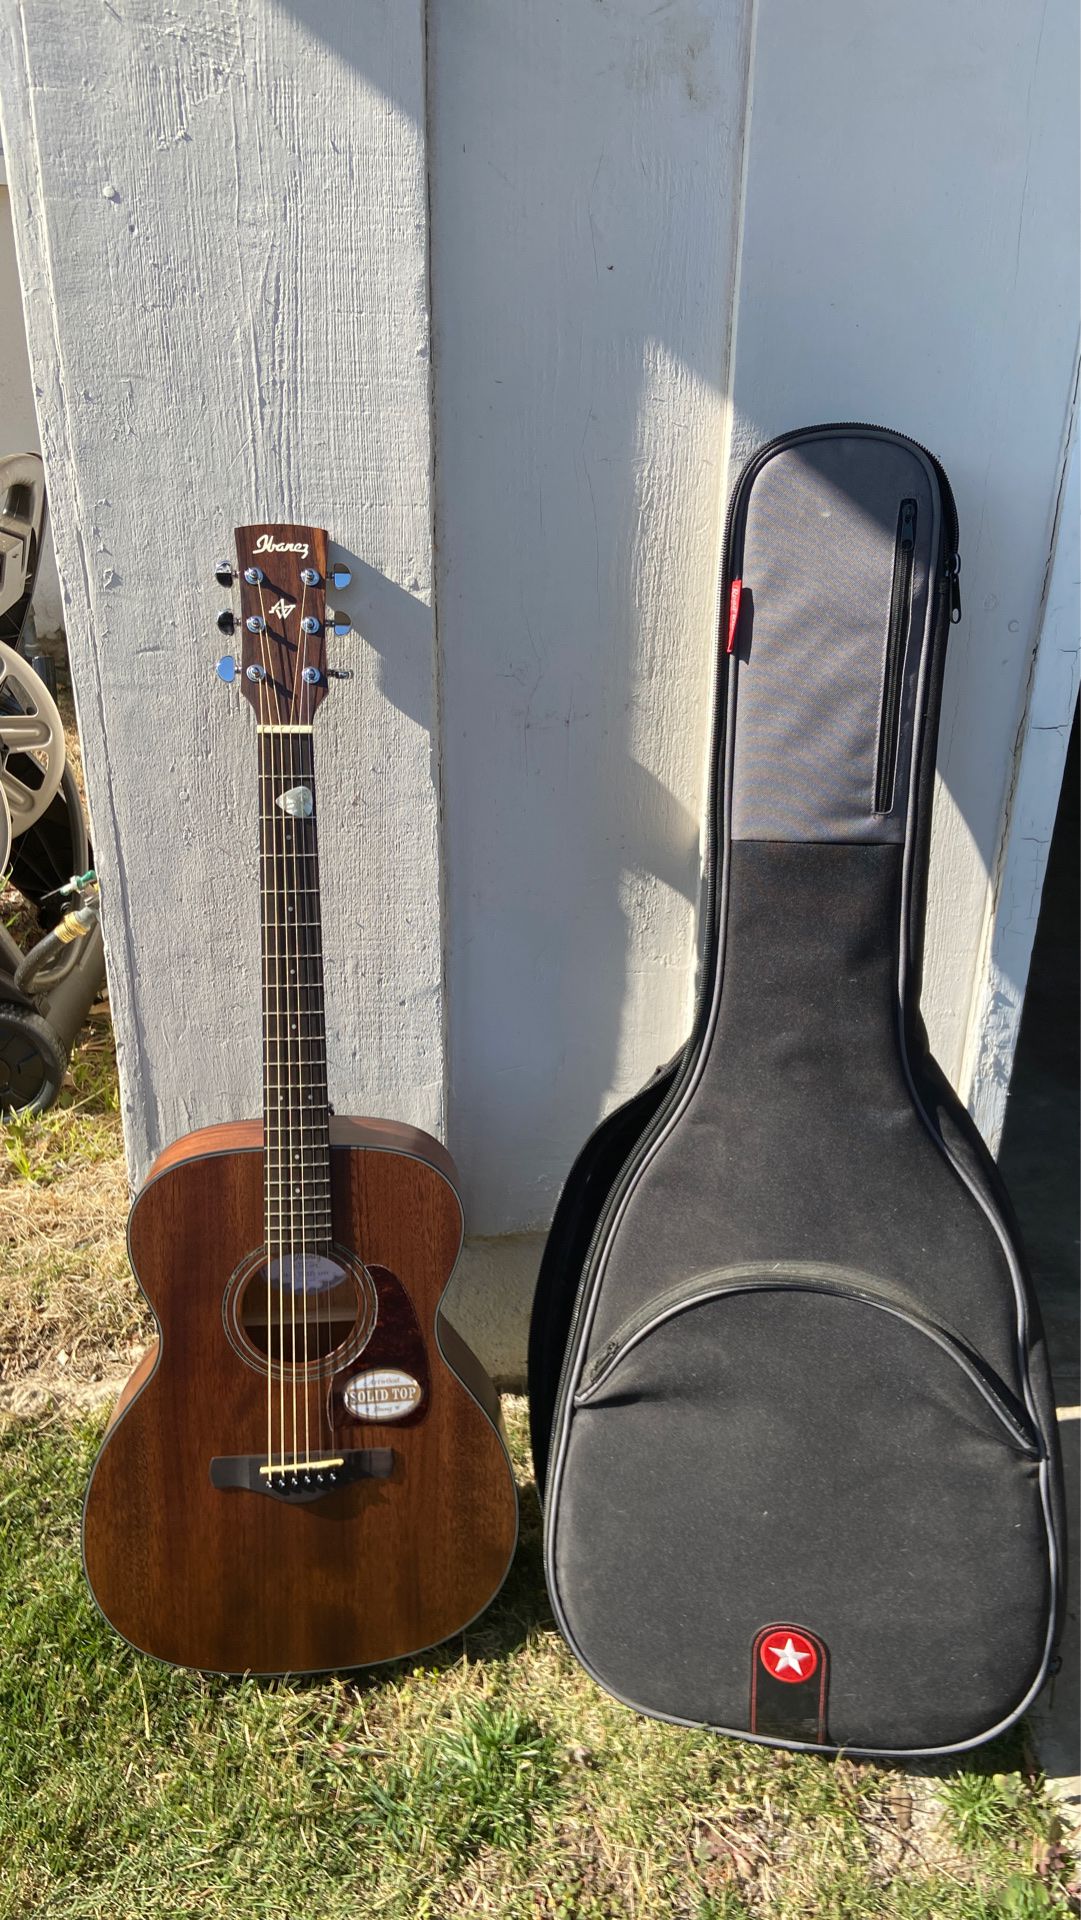 Ibanez solid wood acoustic guitar. Never used—perfect condition